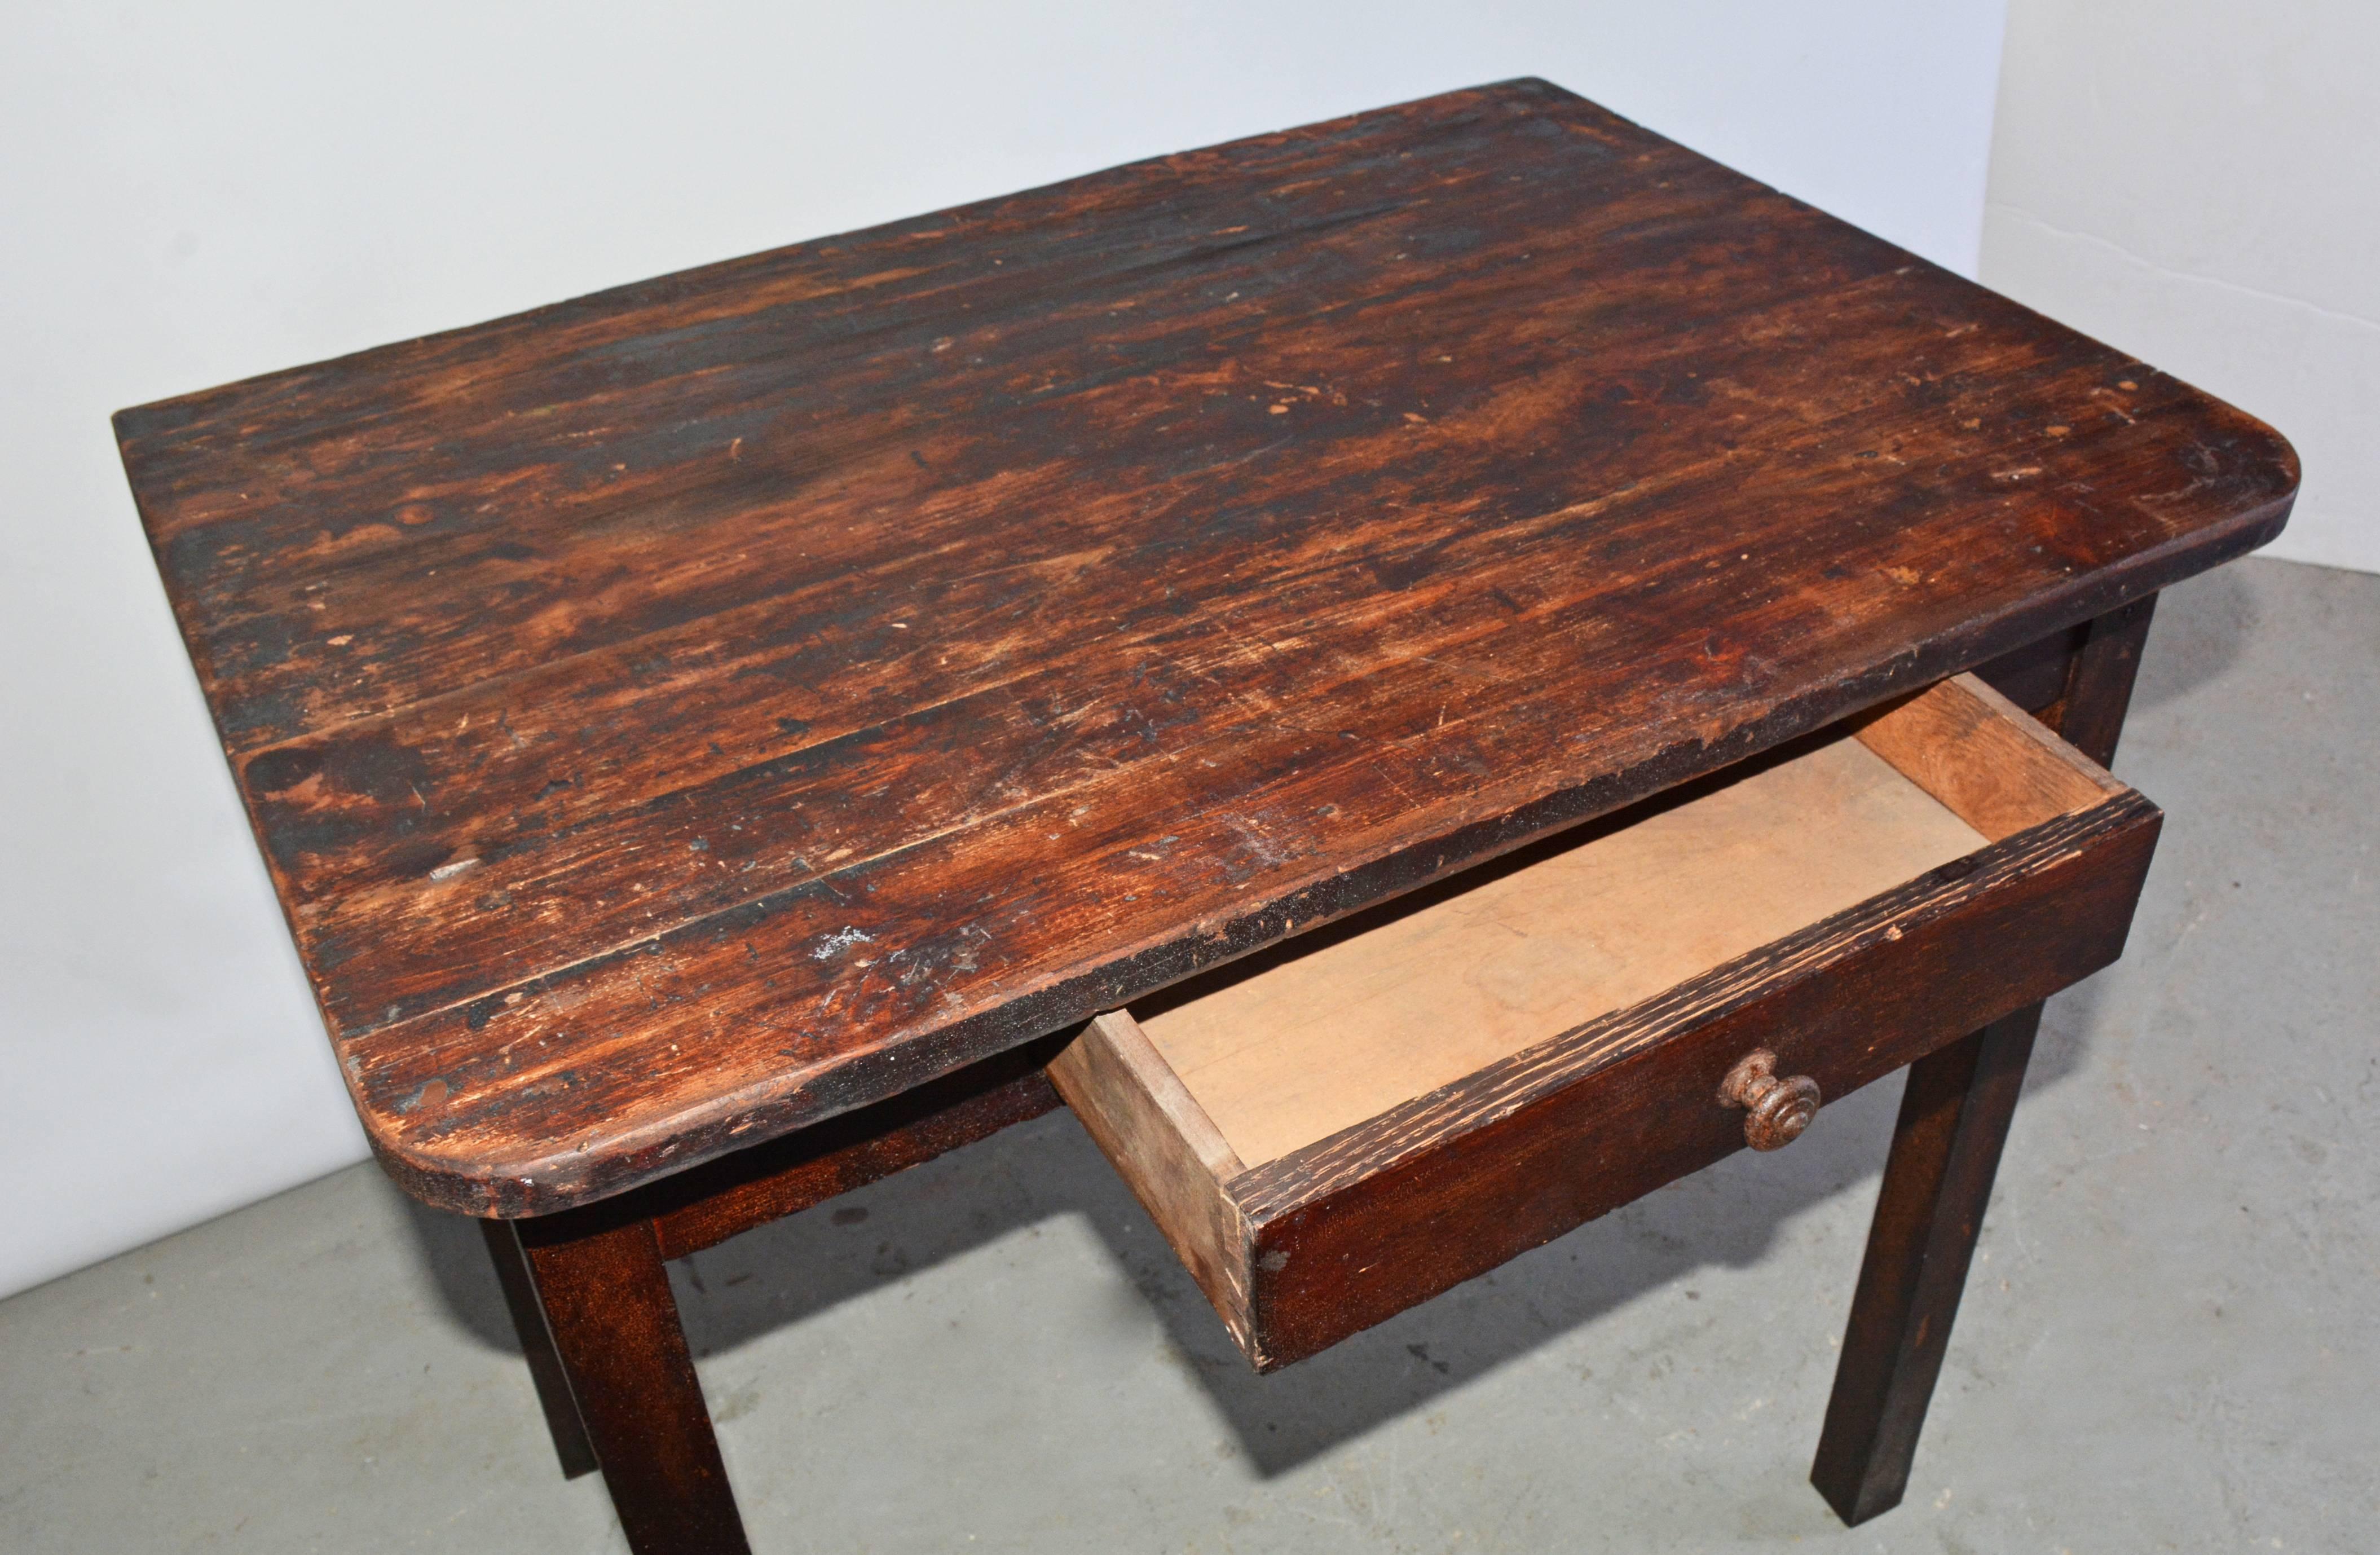 Stained Small Rustic Country Table